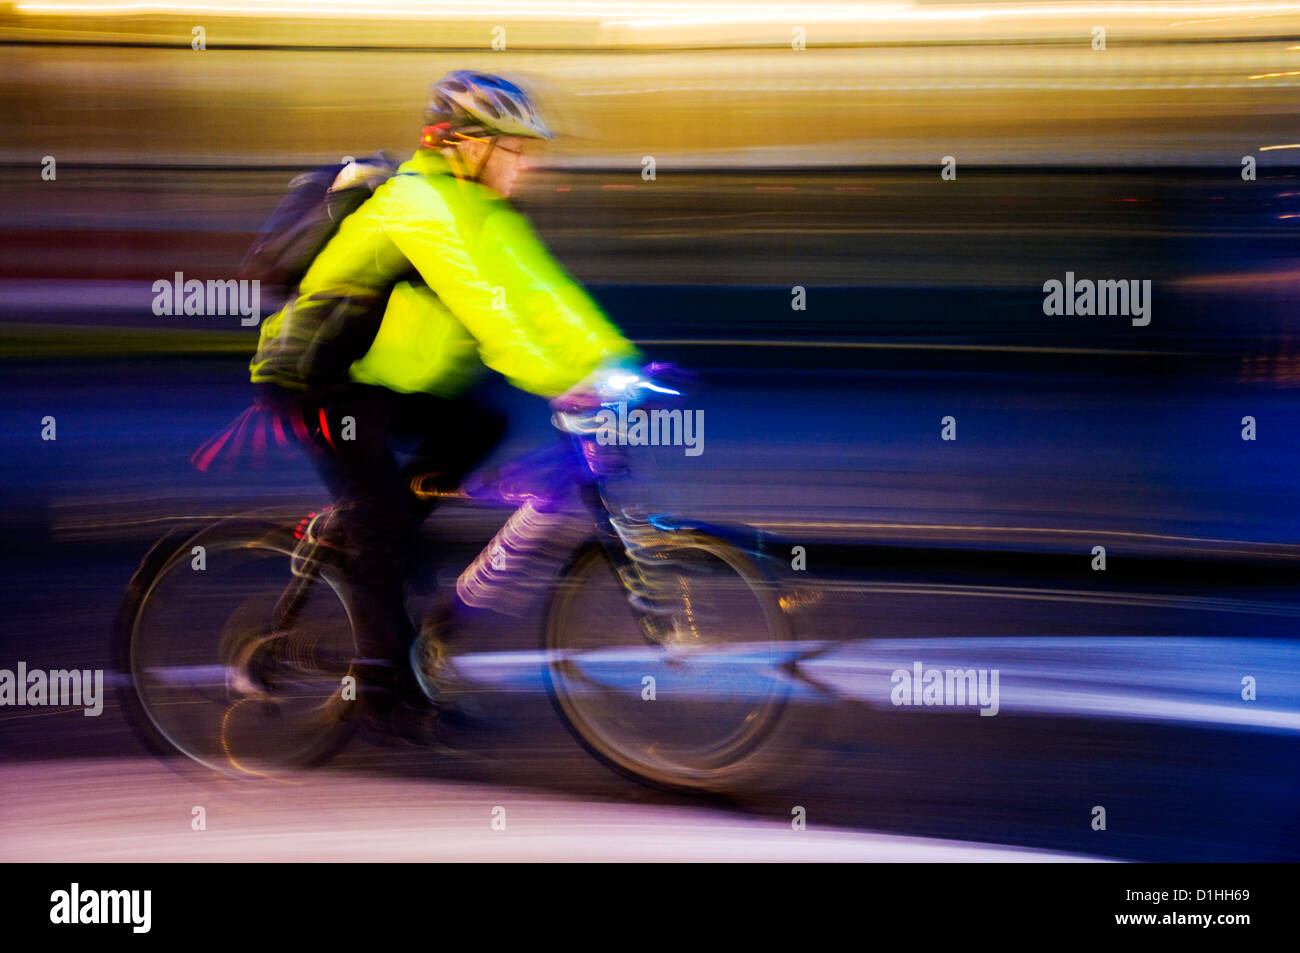 Man riding bicycle at night with lights and hi vis jacket with speed blur Stock Photo